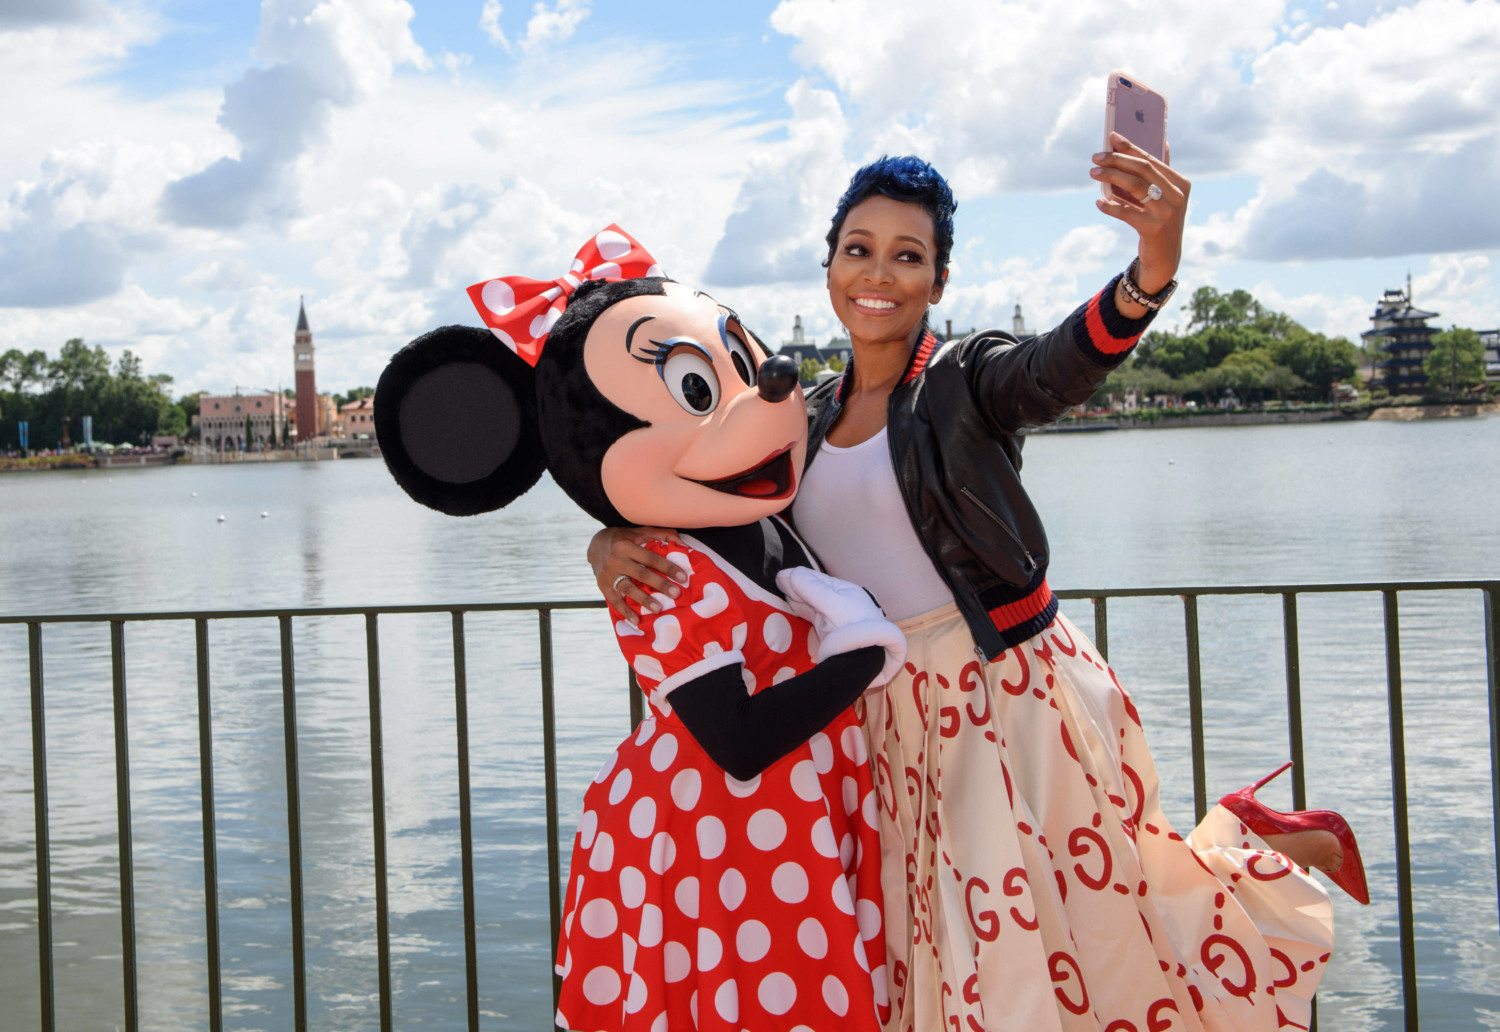 LAKE BUENA VISTA, FL - OCTOBER 06: In this handout photo provided by Disney Parks, Grammy award-winning R&B artist Monica poses with Minnie Mouse on while on break from taping ABC's Emmy-award winning show, "The Chew," at Epcot at Walt Disney World Resort October 6, 2016 in Lake Buena Vista, Florida. "The Chew" taped five shows from the 21st Epcot International Food & Wine Festival with co-hosts Mario Batali, Michael Symon, Carla Hall, Clinton Kelly and Daphne Oz. Episodes featuring different celebrity guests will air on the ABC Television Network, October 10-14, at 1 p.m. EDT, 12 p.m. PDT (check local listings). (Photo by Todd Anderson/Disney Parks via Getty Images)